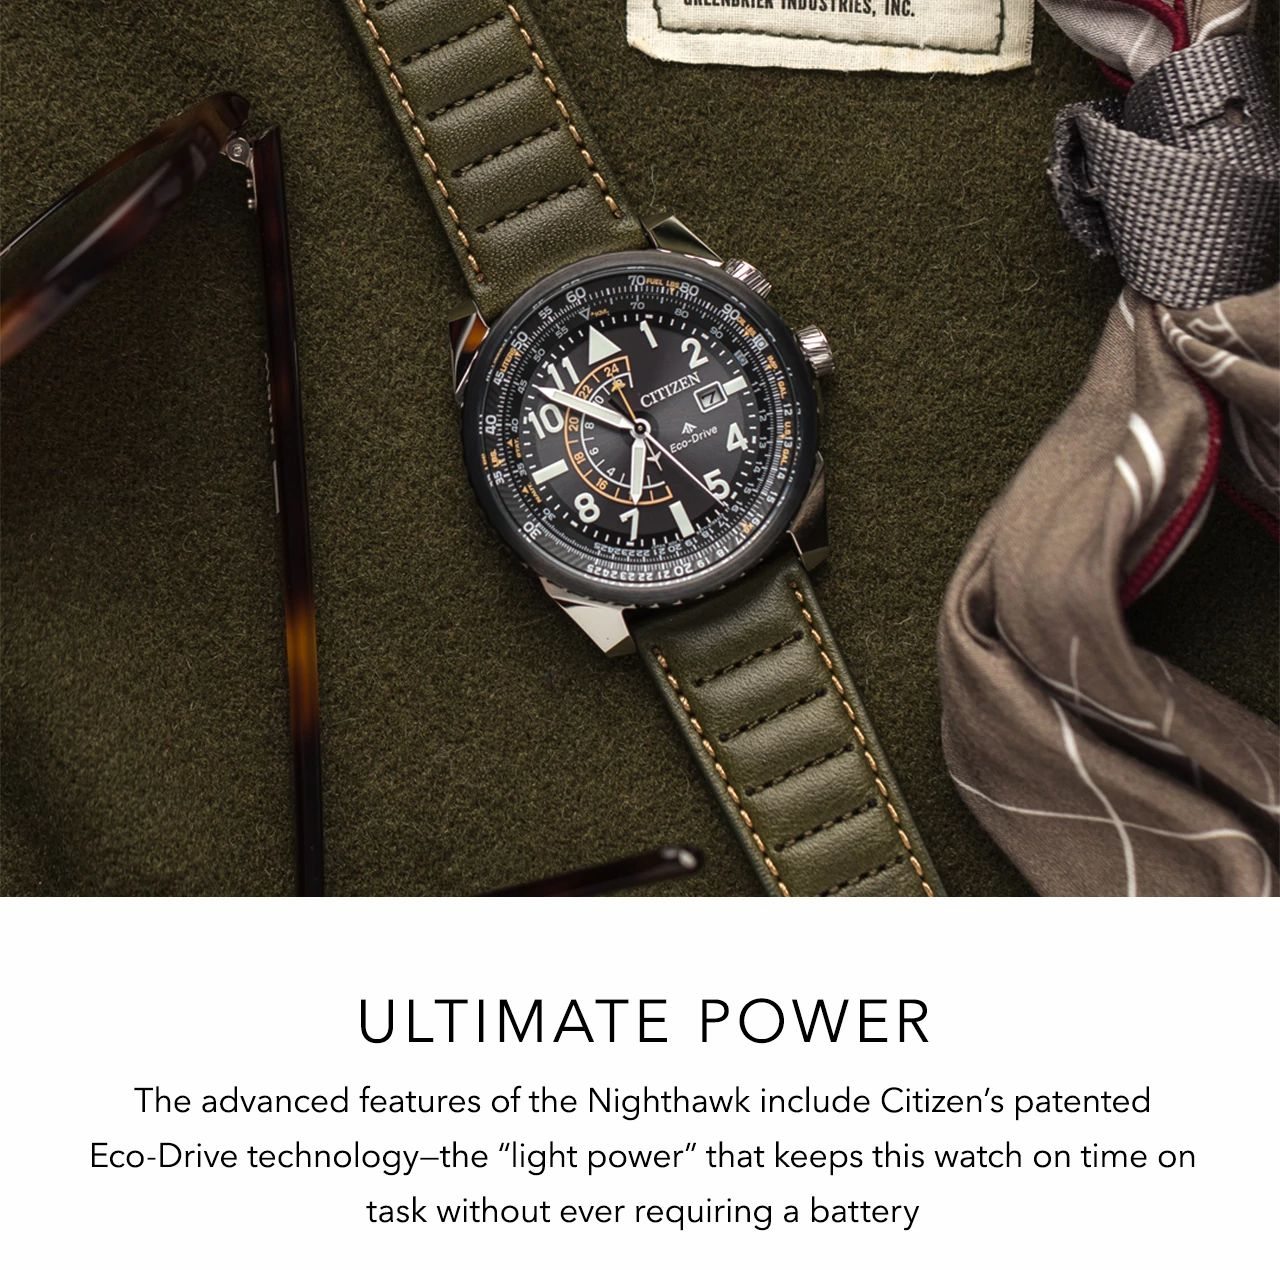 Ultimate Power - The advanced features of the Nighthawk include Citizen’s patented Eco-Drive technology—the “light power” that keeps this watch on time on task without ever requiring a battery.